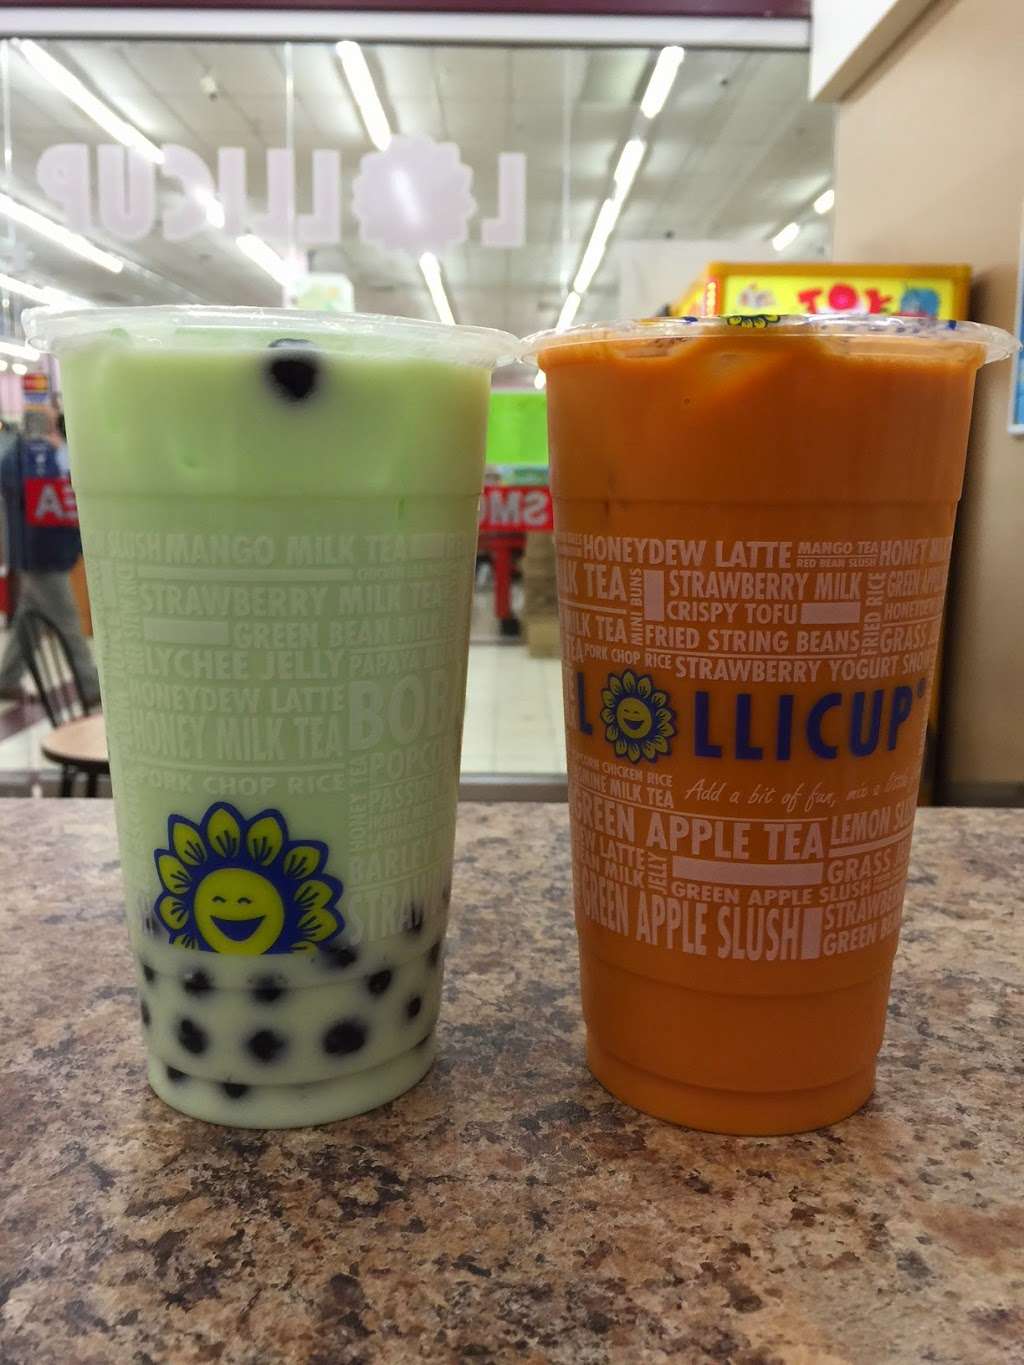 Lollicup Quincy (Located inside Kam Man Market) | 219 Quincy Ave, Quincy, MA 02169 | Phone: (617) 657-3528